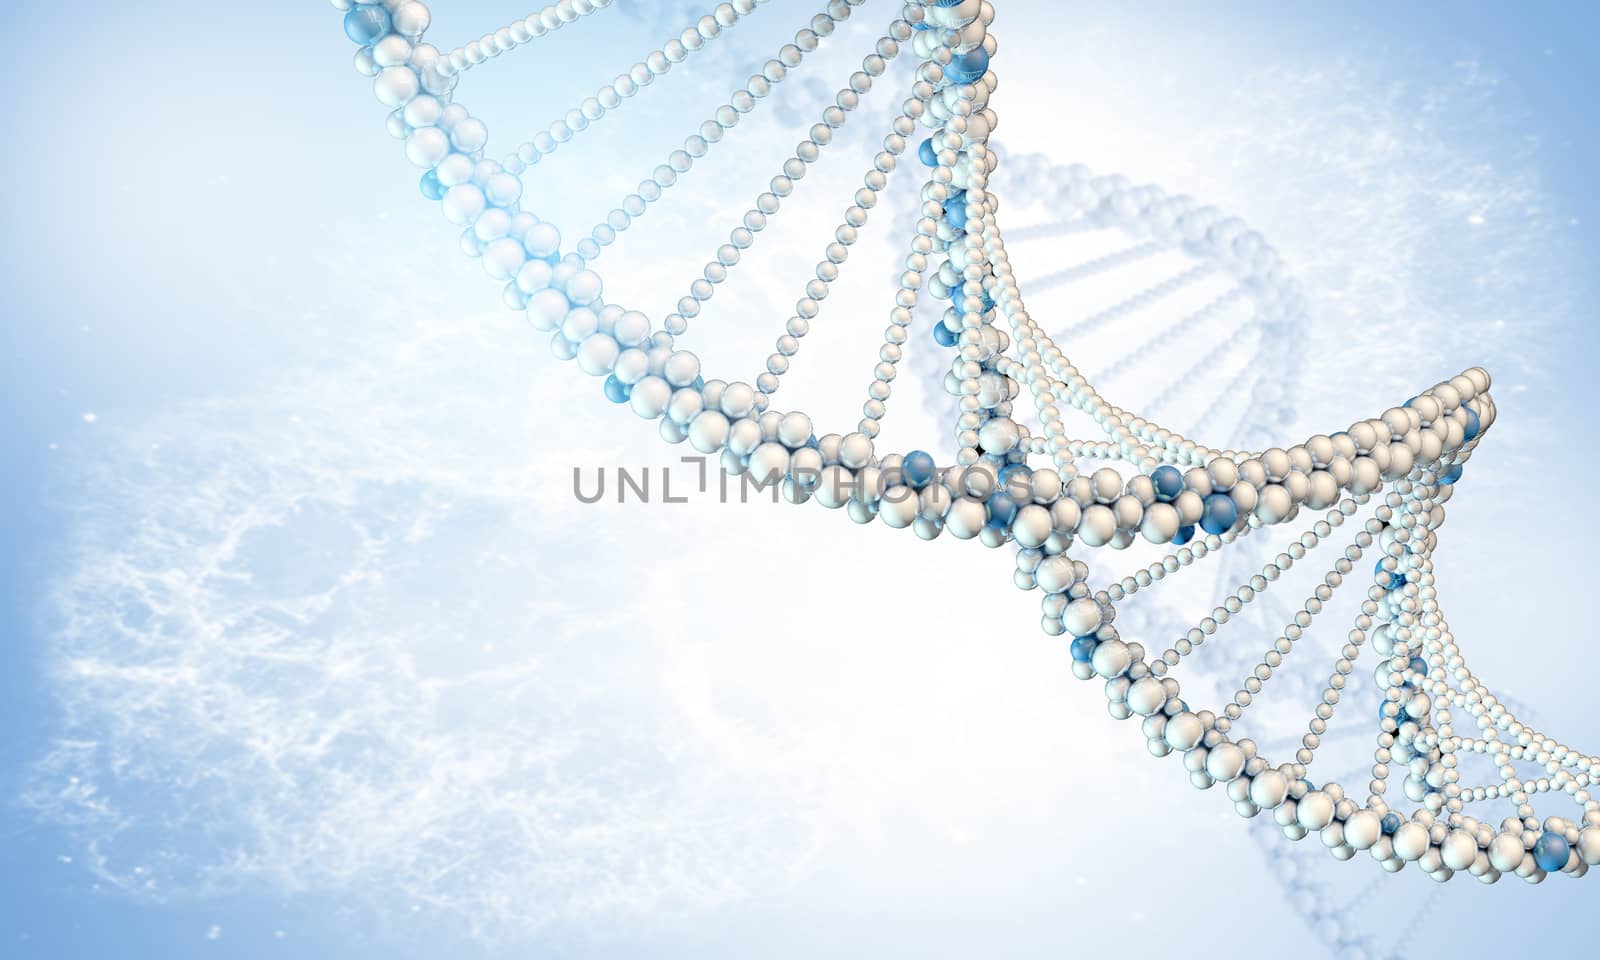 DNA model on the blue gradient background